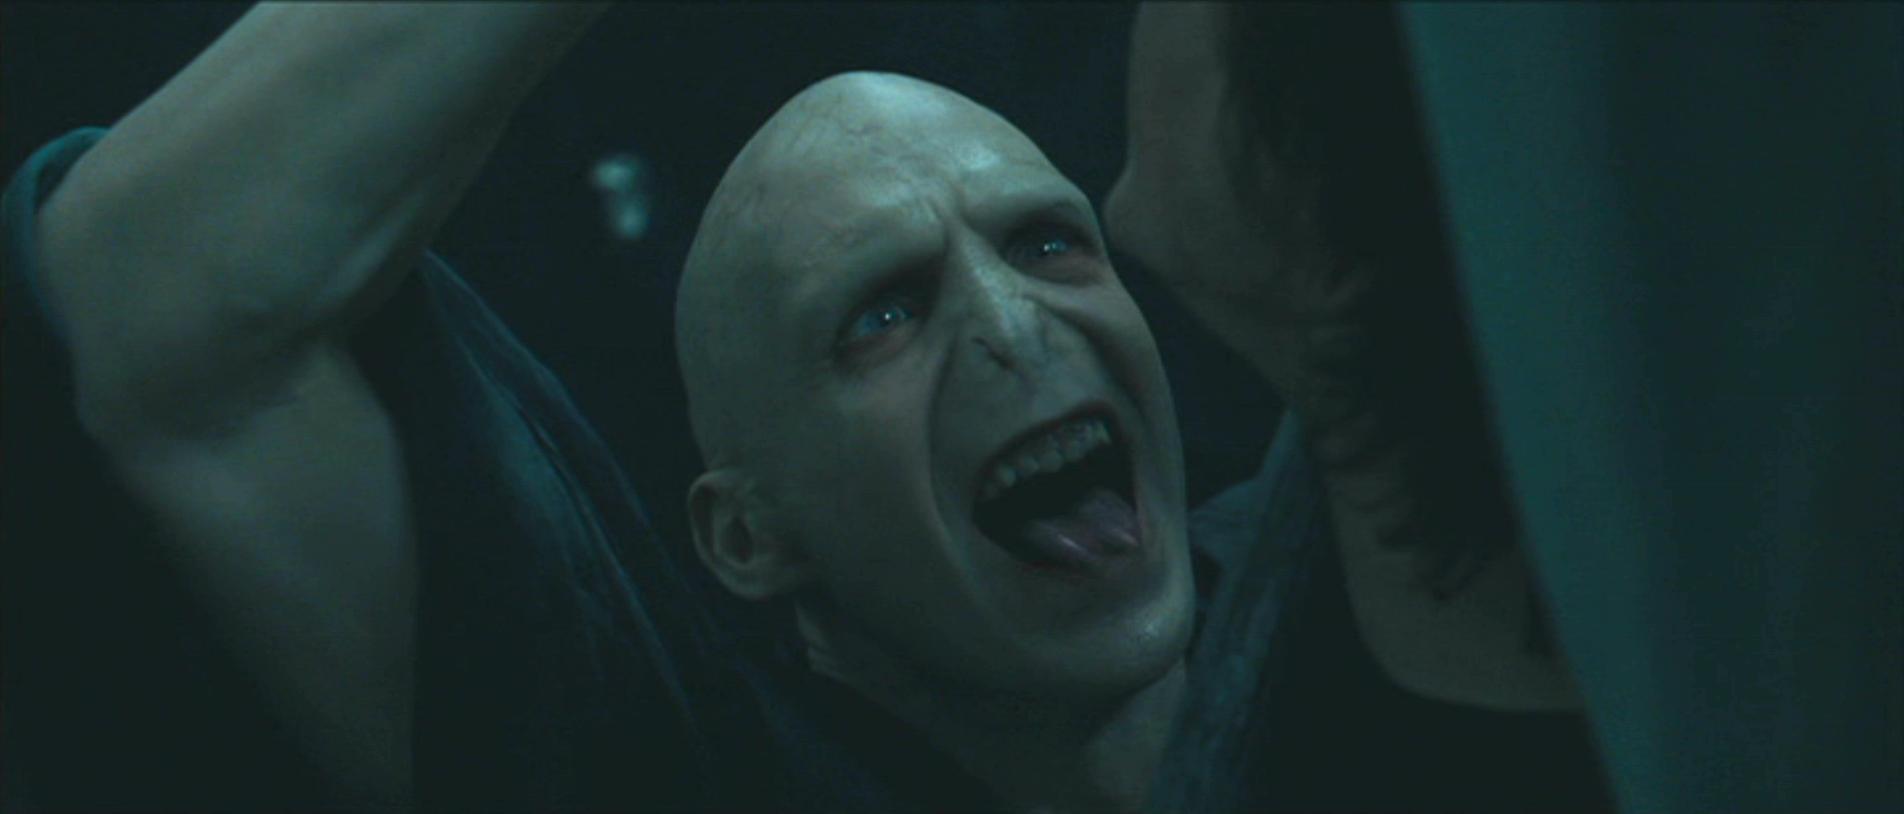 Lord Voldemort Images on Fanpop.